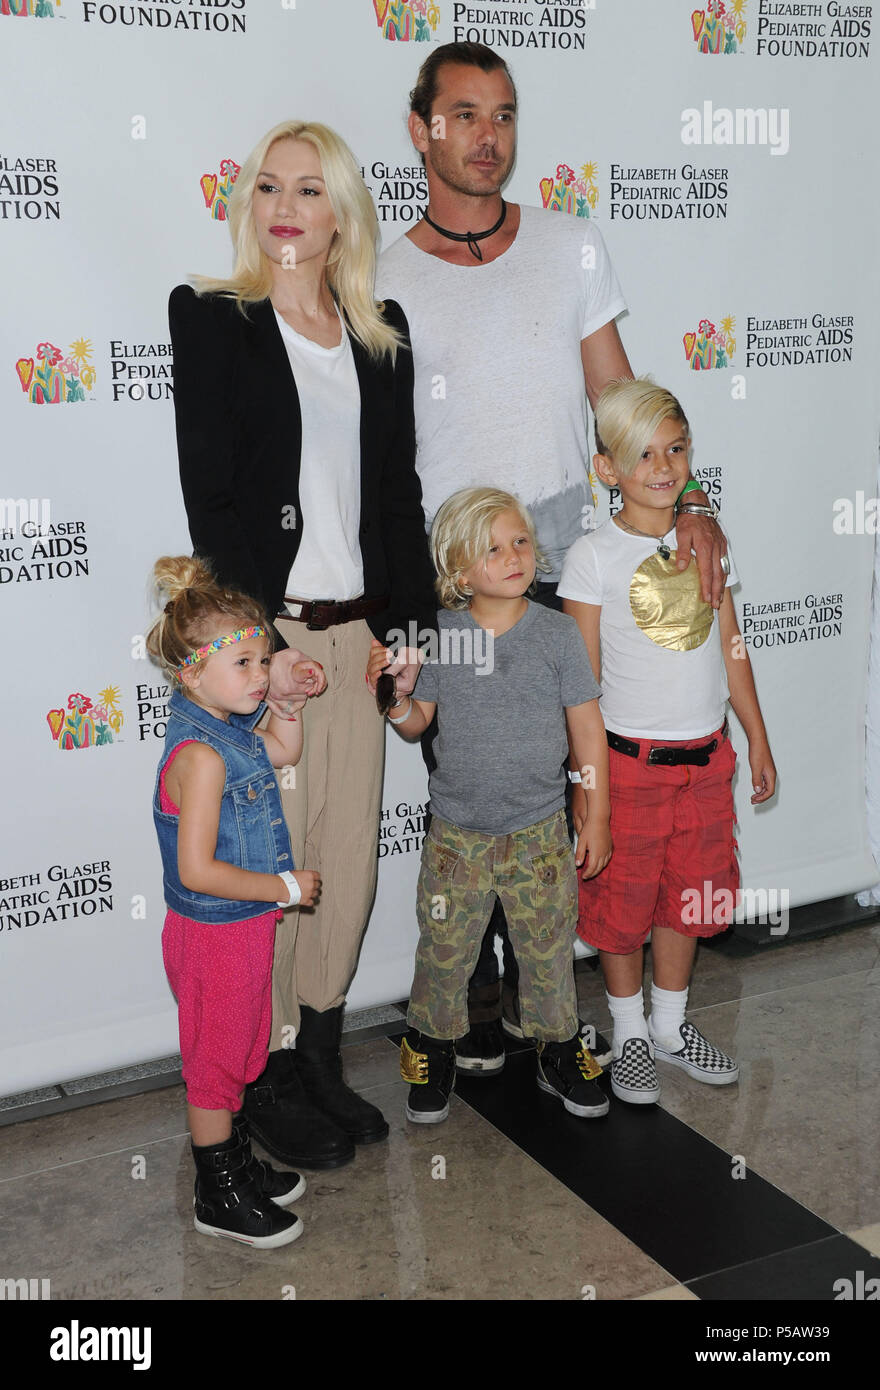 Gwen Stefani, Gavin Rossdale,  Kids Zuma, Kingston and Niece Stella Stefani  arriving the 2013 A Time For Heroes at Century Park In Los Angeles. Elizabeth Glaser Pedriatic Aids Foundation a Gwen Stefani, Gavin Rossdale,  Kids Zuma, Kingston and Niece Stella Stefani 104 ------------- Red Carpet Event, Vertical, USA, Film Industry, Celebrities,  Photography, Bestof, Arts Culture and Entertainment, Topix Celebrities fashion /  Vertical, Best of, Event in Hollywood Life - California,  Red Carpet and backstage, USA, Film Industry, Celebrities,  movie celebrities, TV celebrities, Music celebrities,  Stock Photo